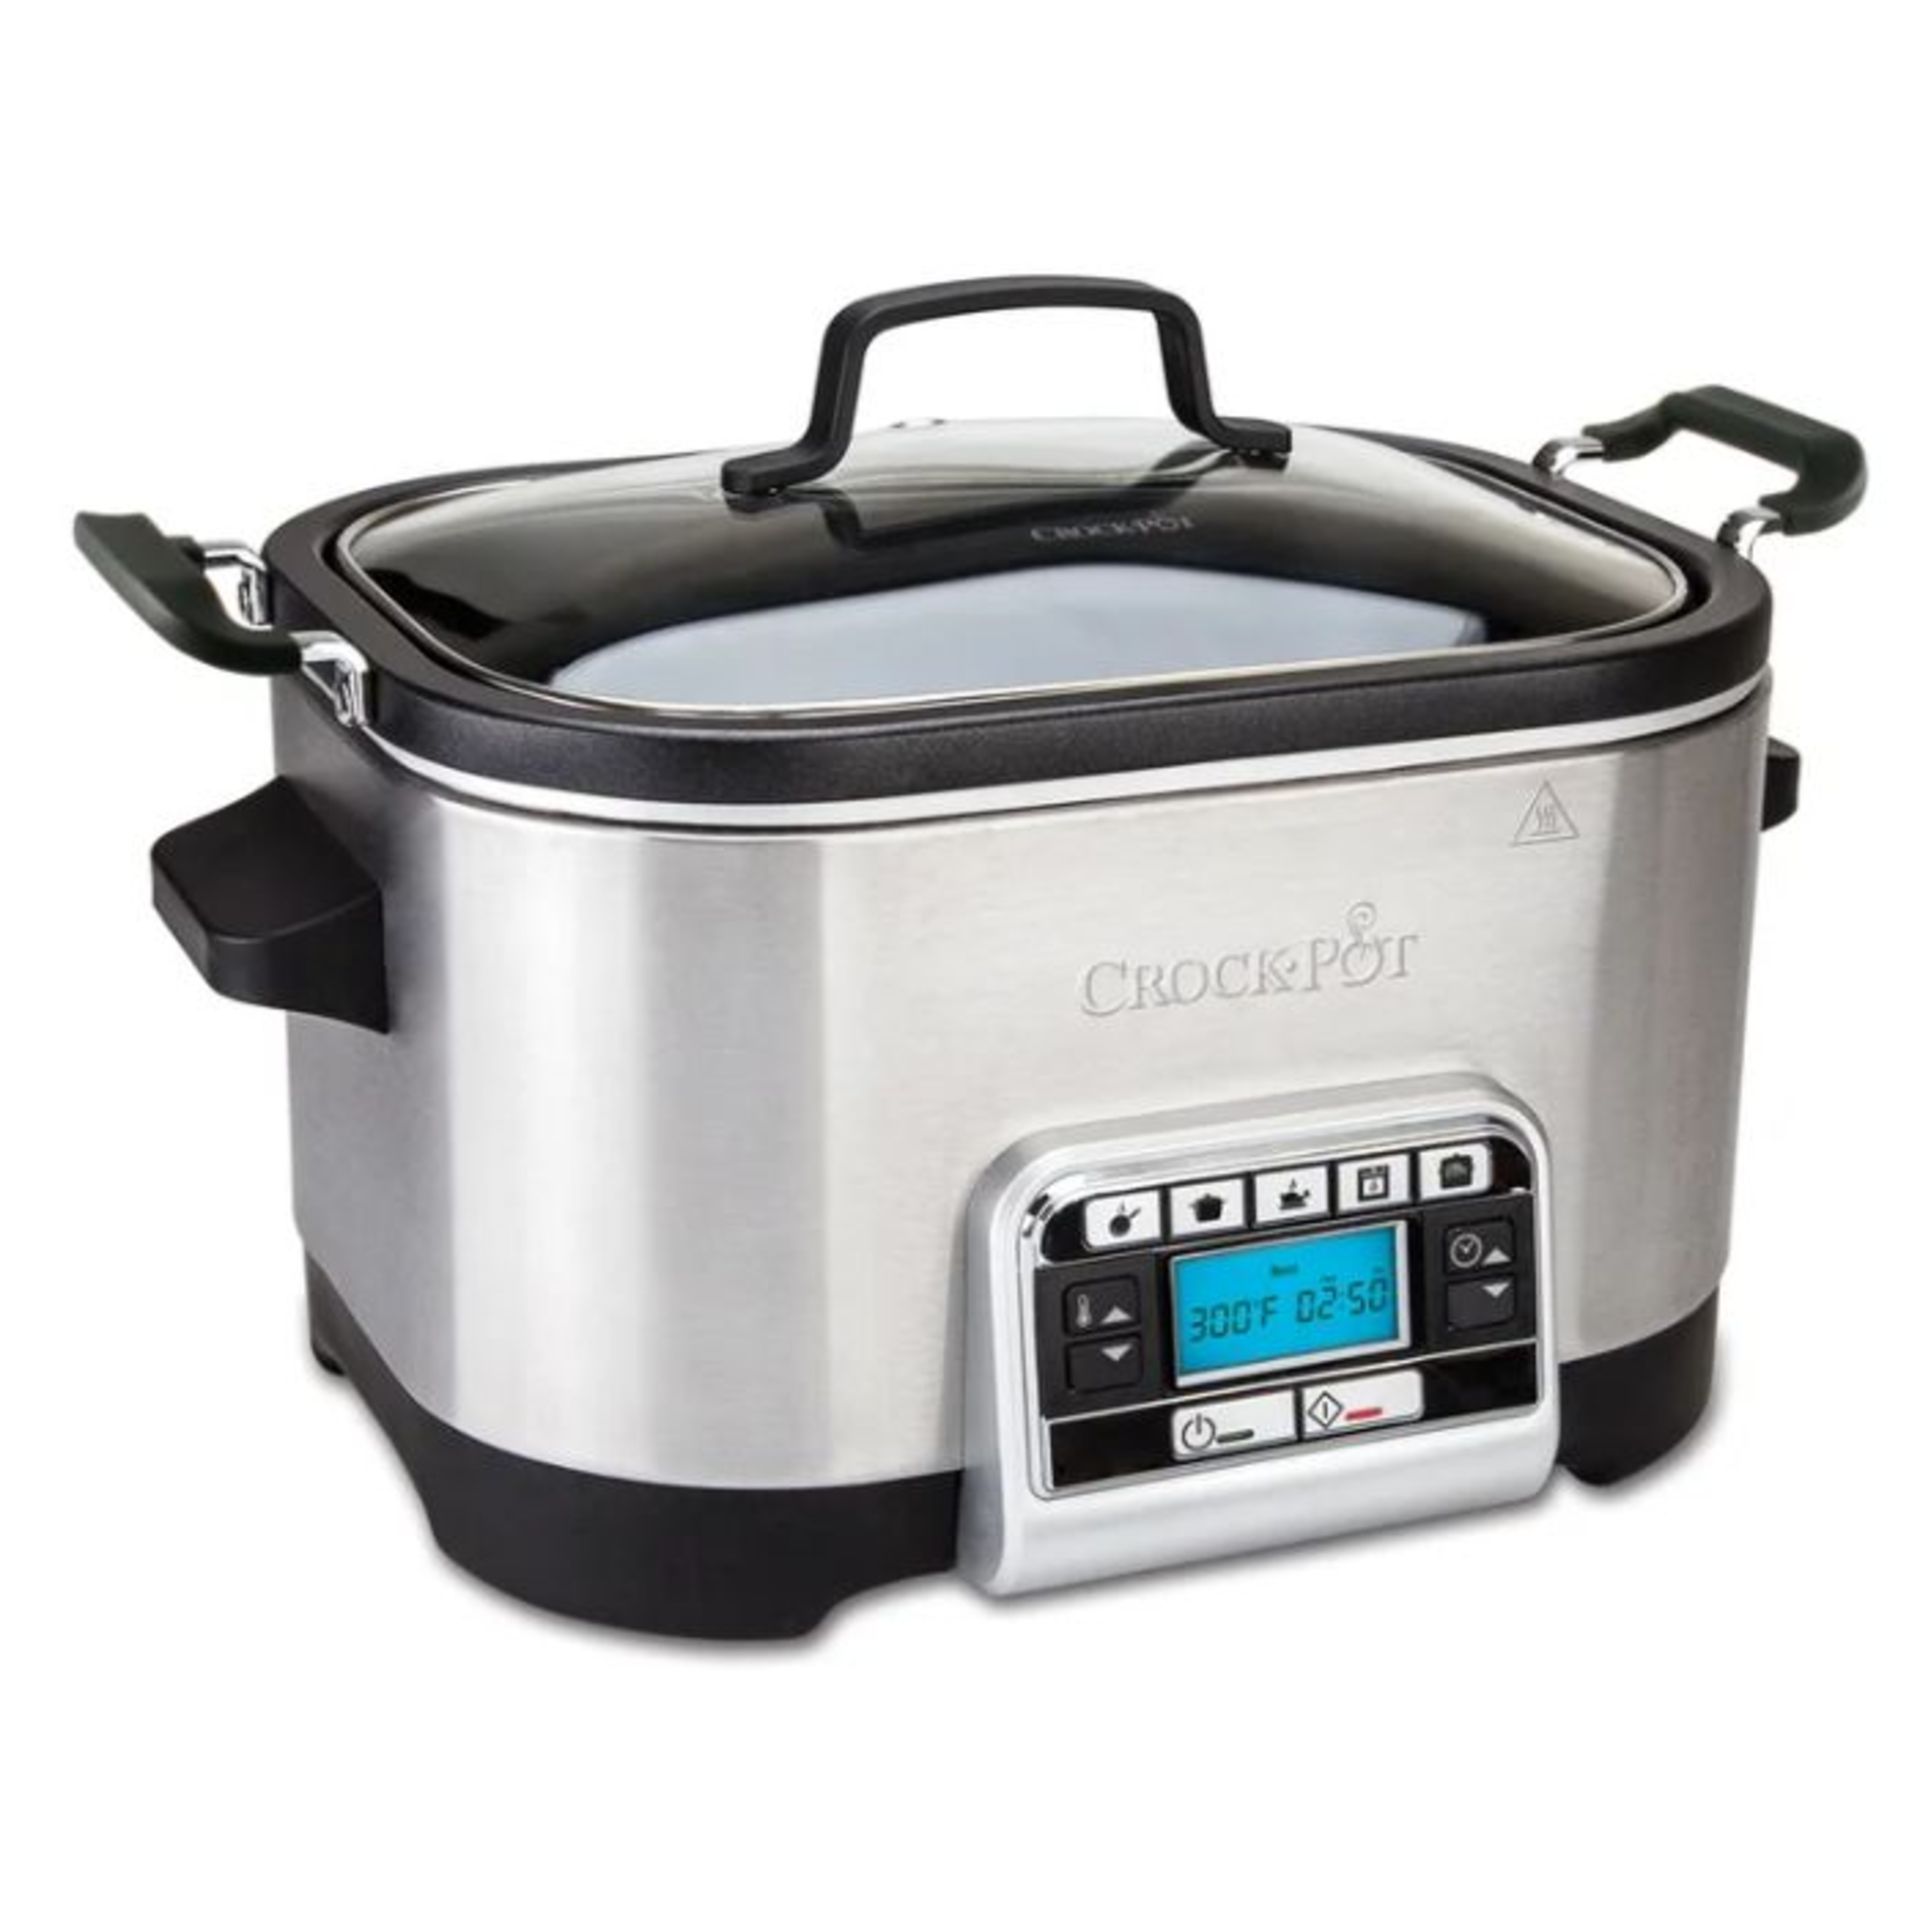 Crock-Pot, Crock-Pot 5.6 L Stainless Steel Digital Slow and Multi-Cooker (NOT TESTED) - RRP £137.